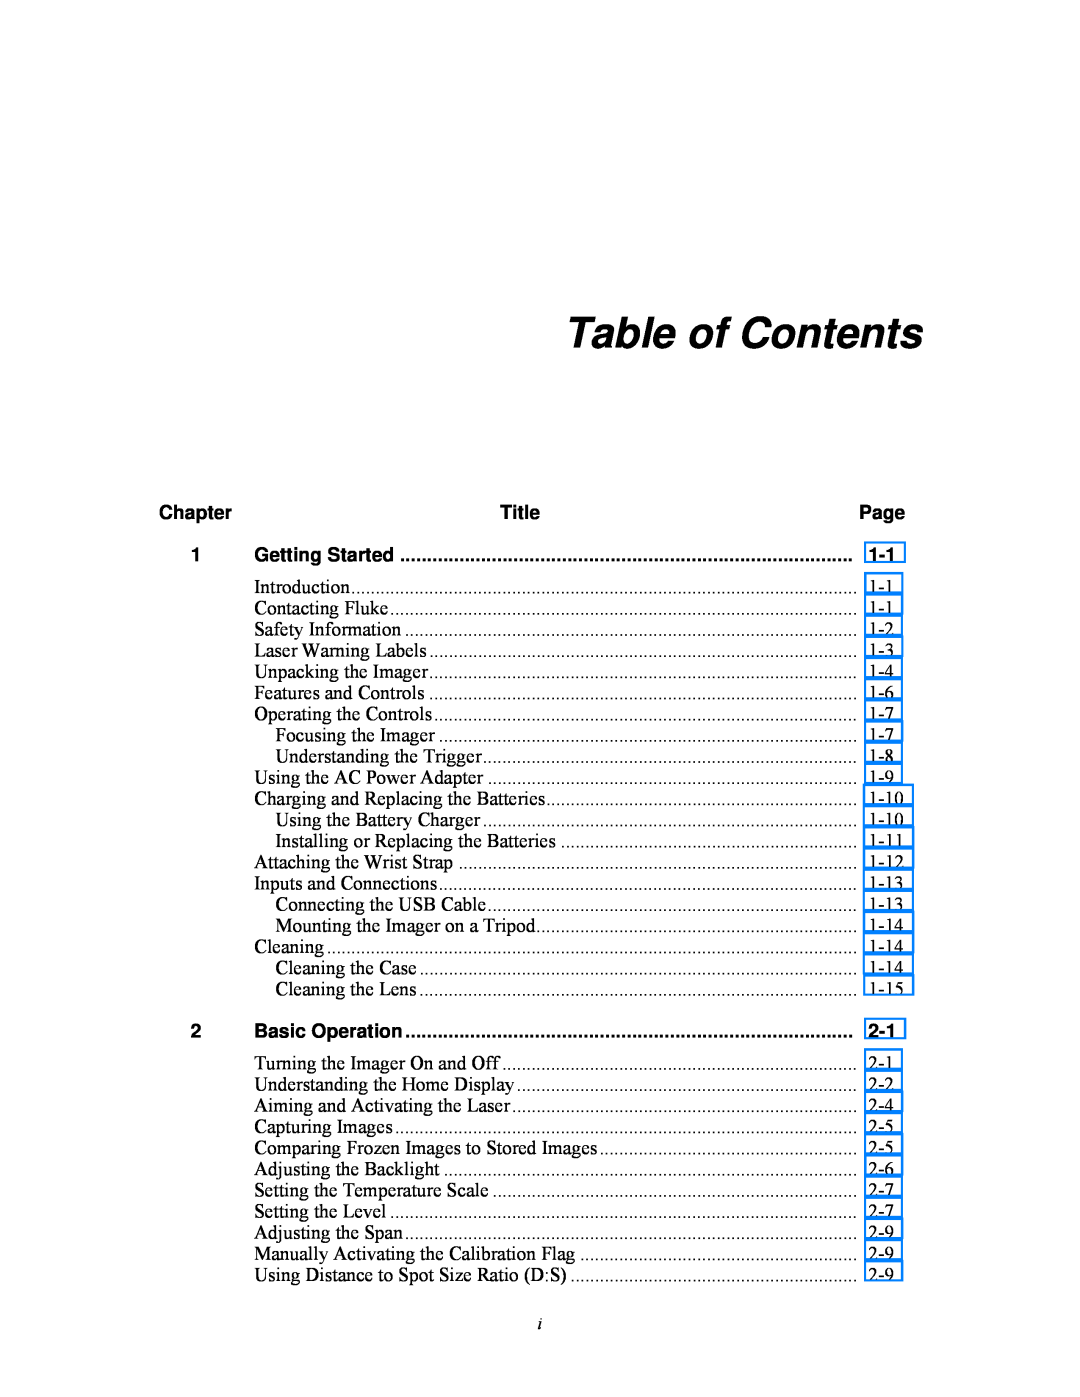 Fluke Ti20 user manual Table of Contents, Title, Getting Started, Basic Operation 